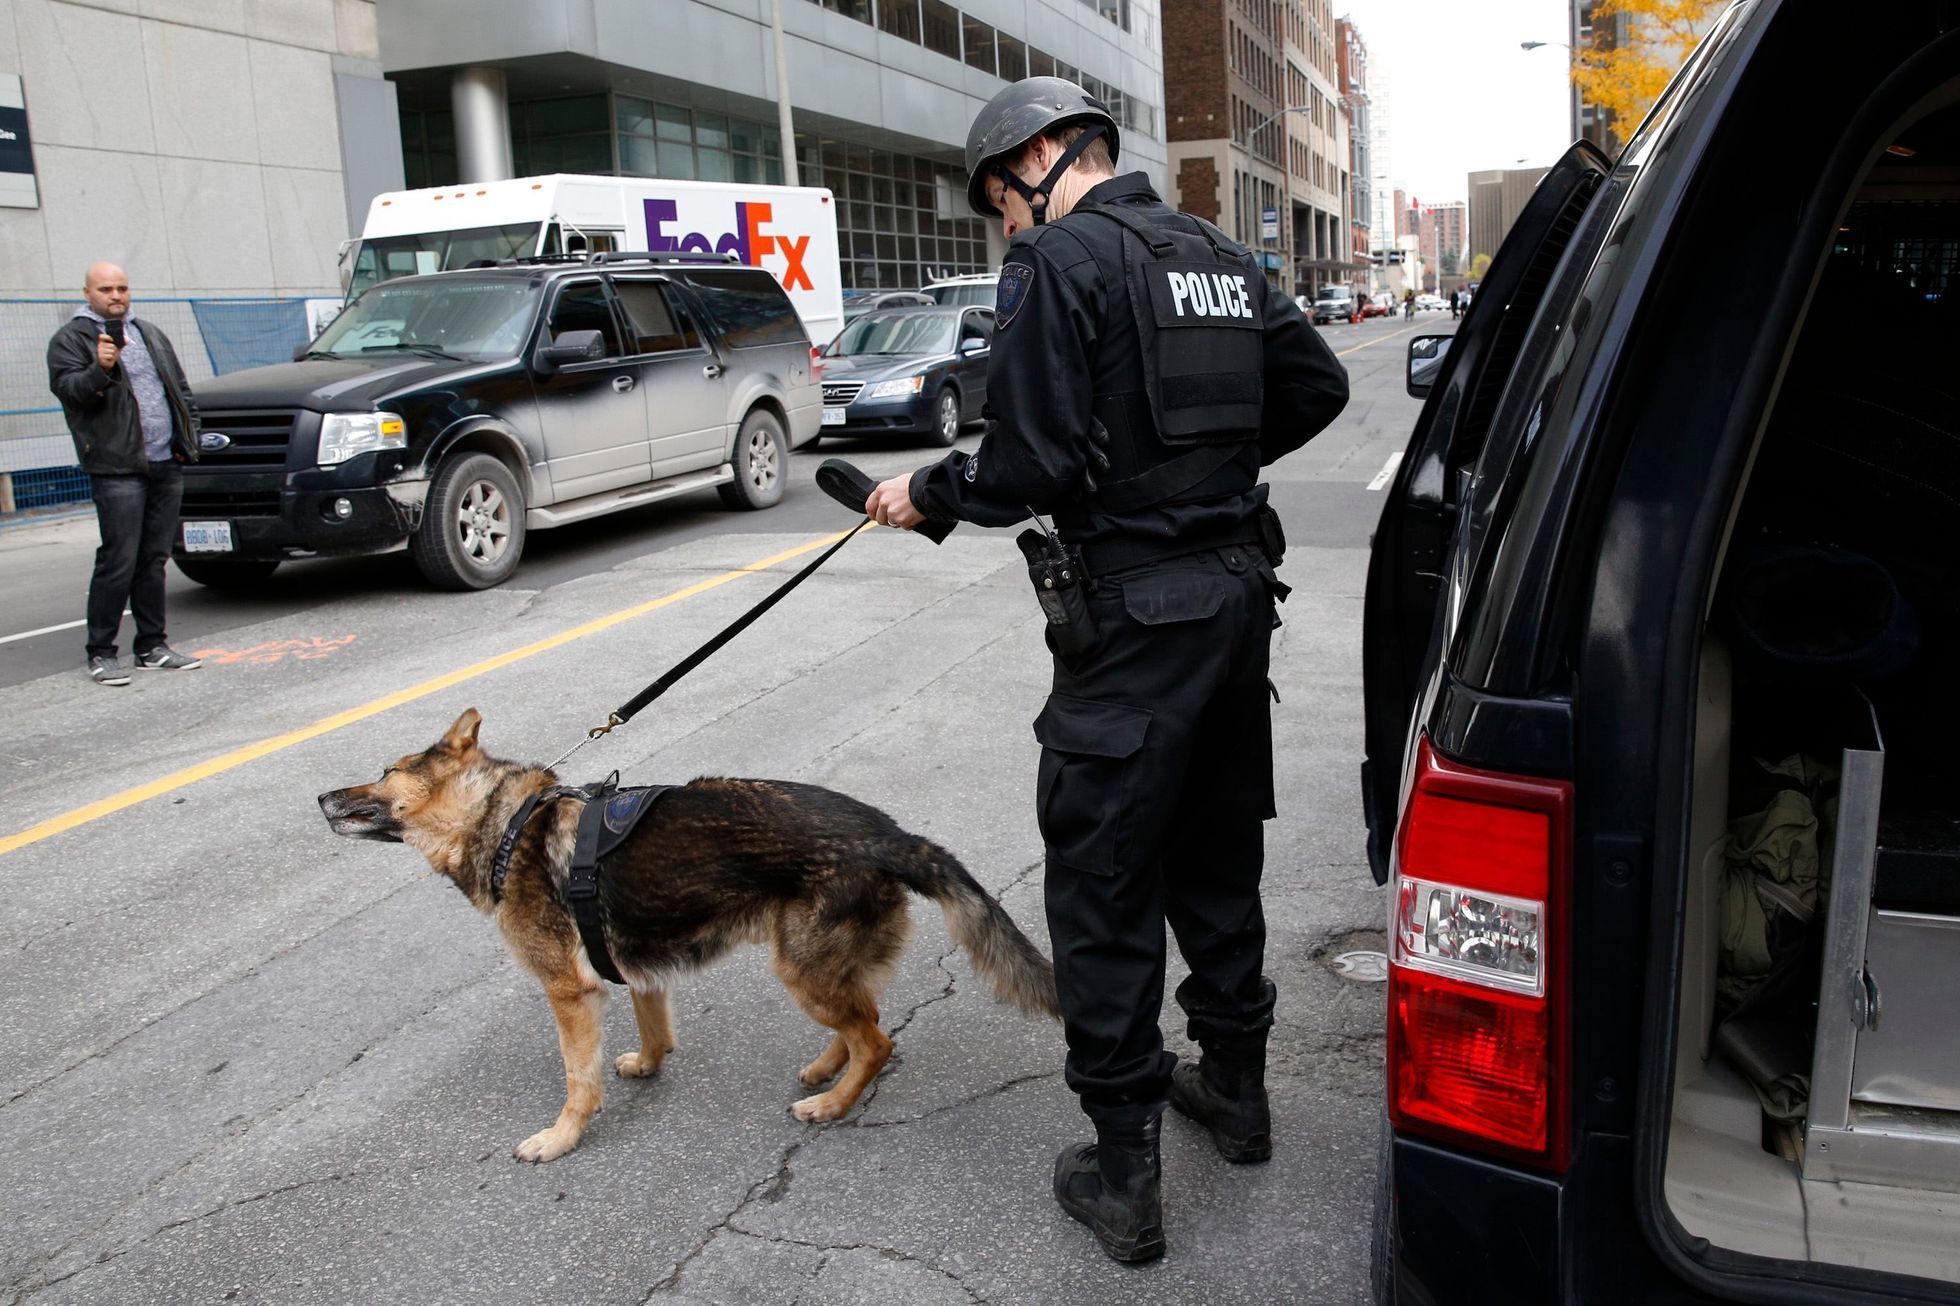 A Ottawa police officer prepares a service dog following shooting incidents in downtown Ottawa